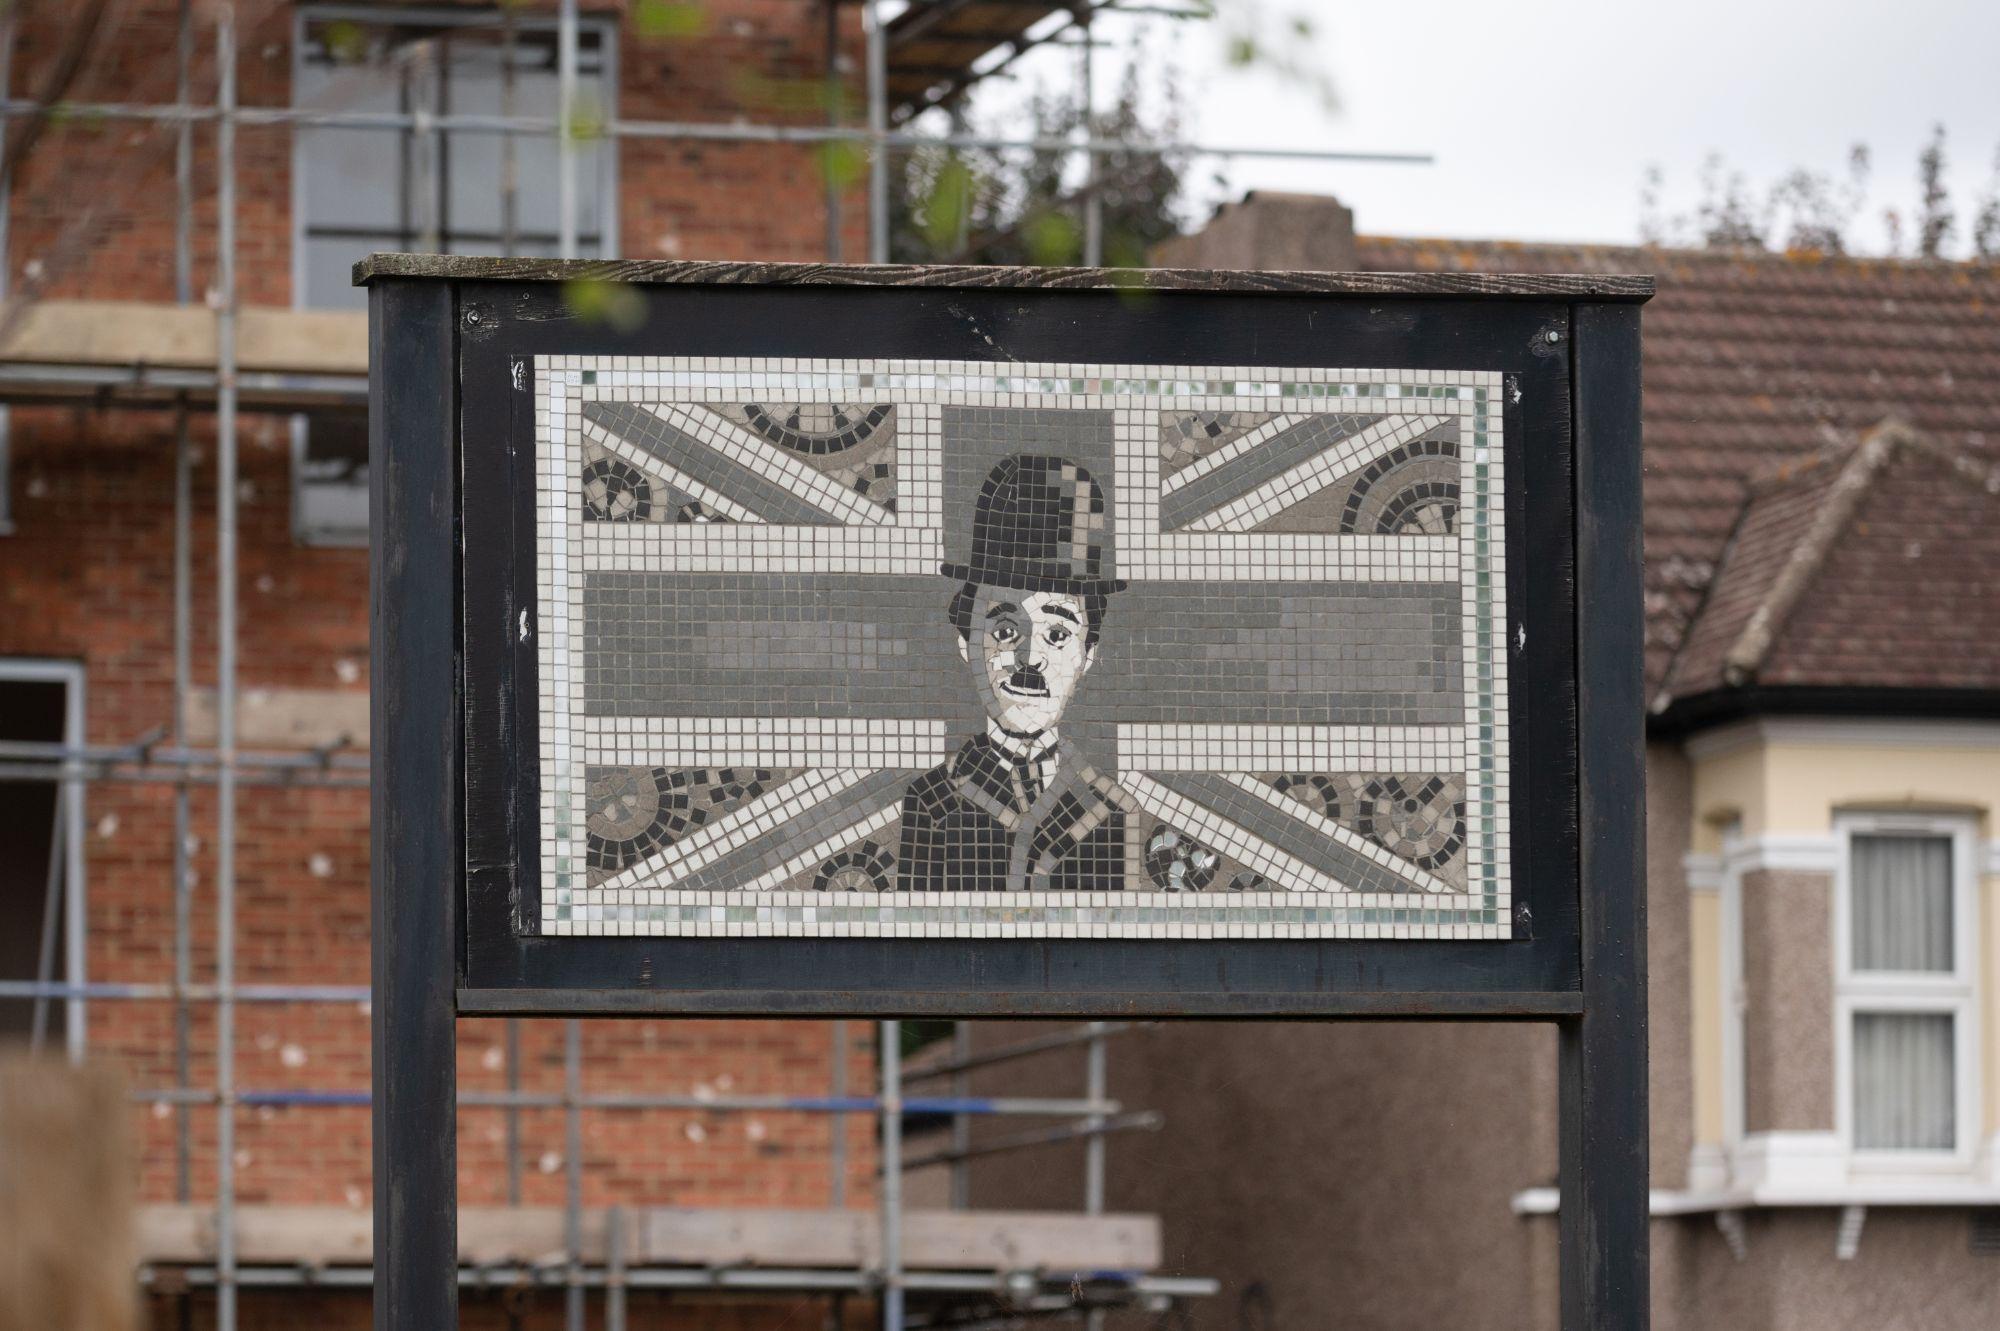 A mosaic showing Chaplin in front of the Union Jack